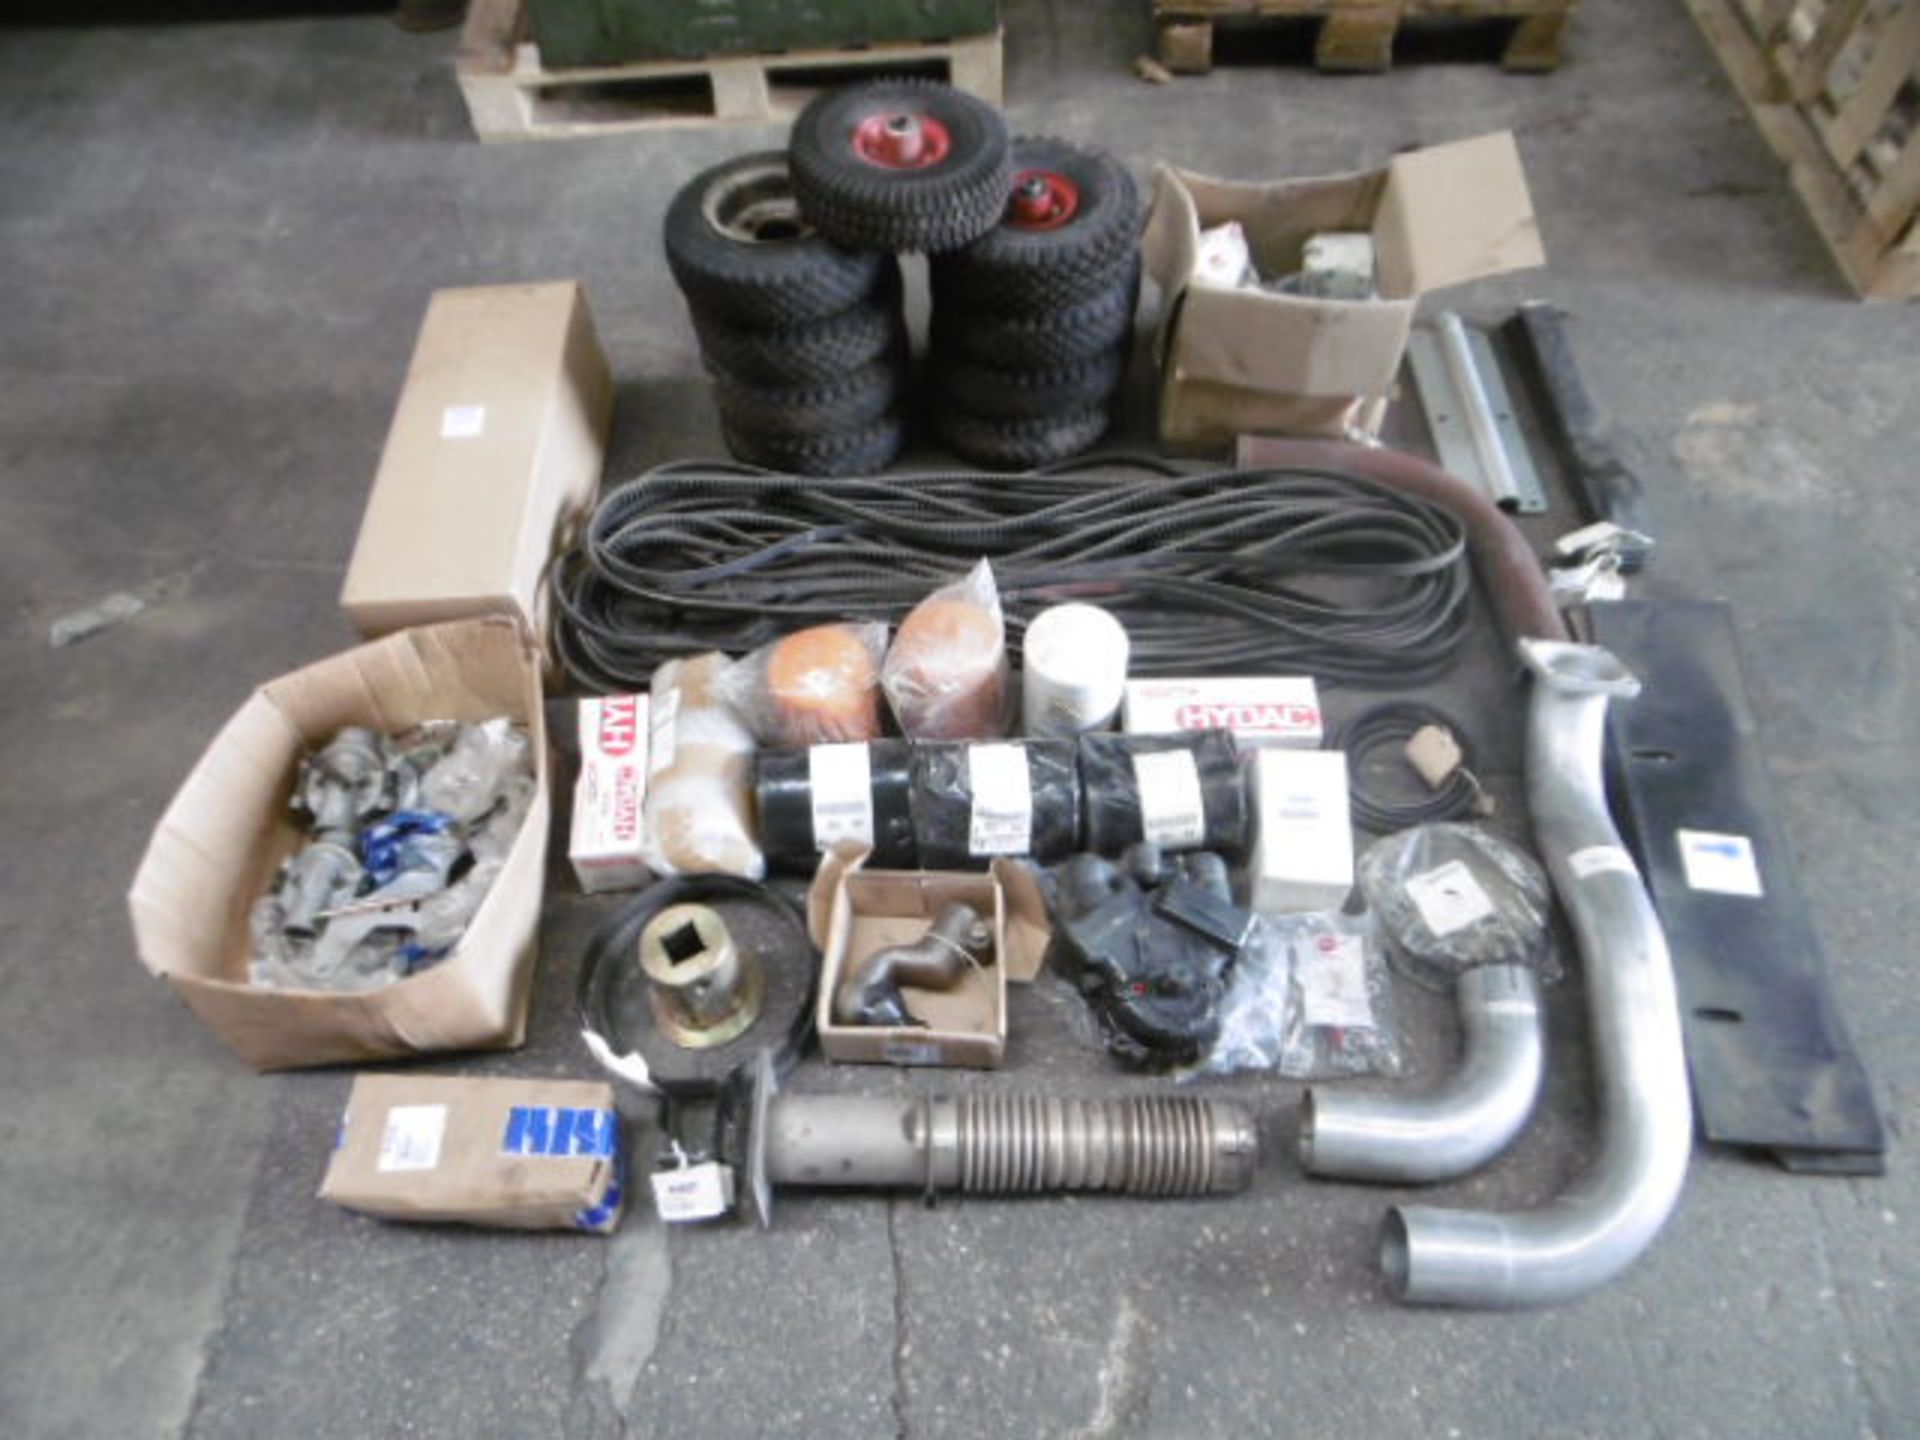 Mixed Stillage of Johnston Sweeper Parts